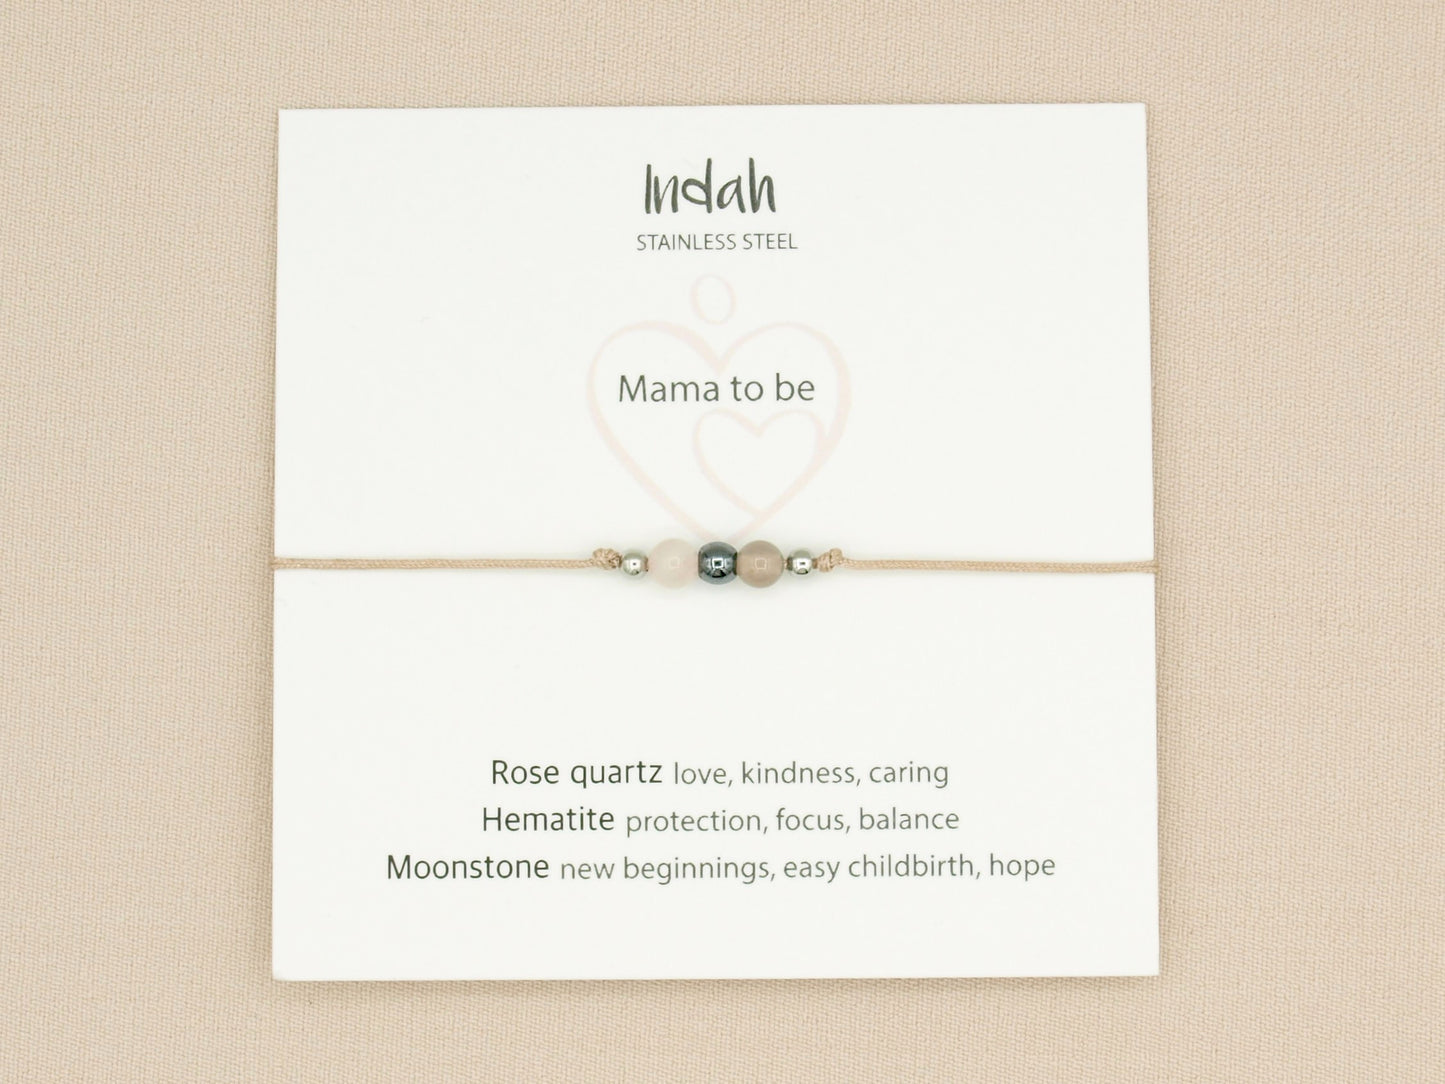 Bracelet rock, mama to be, silver and gold